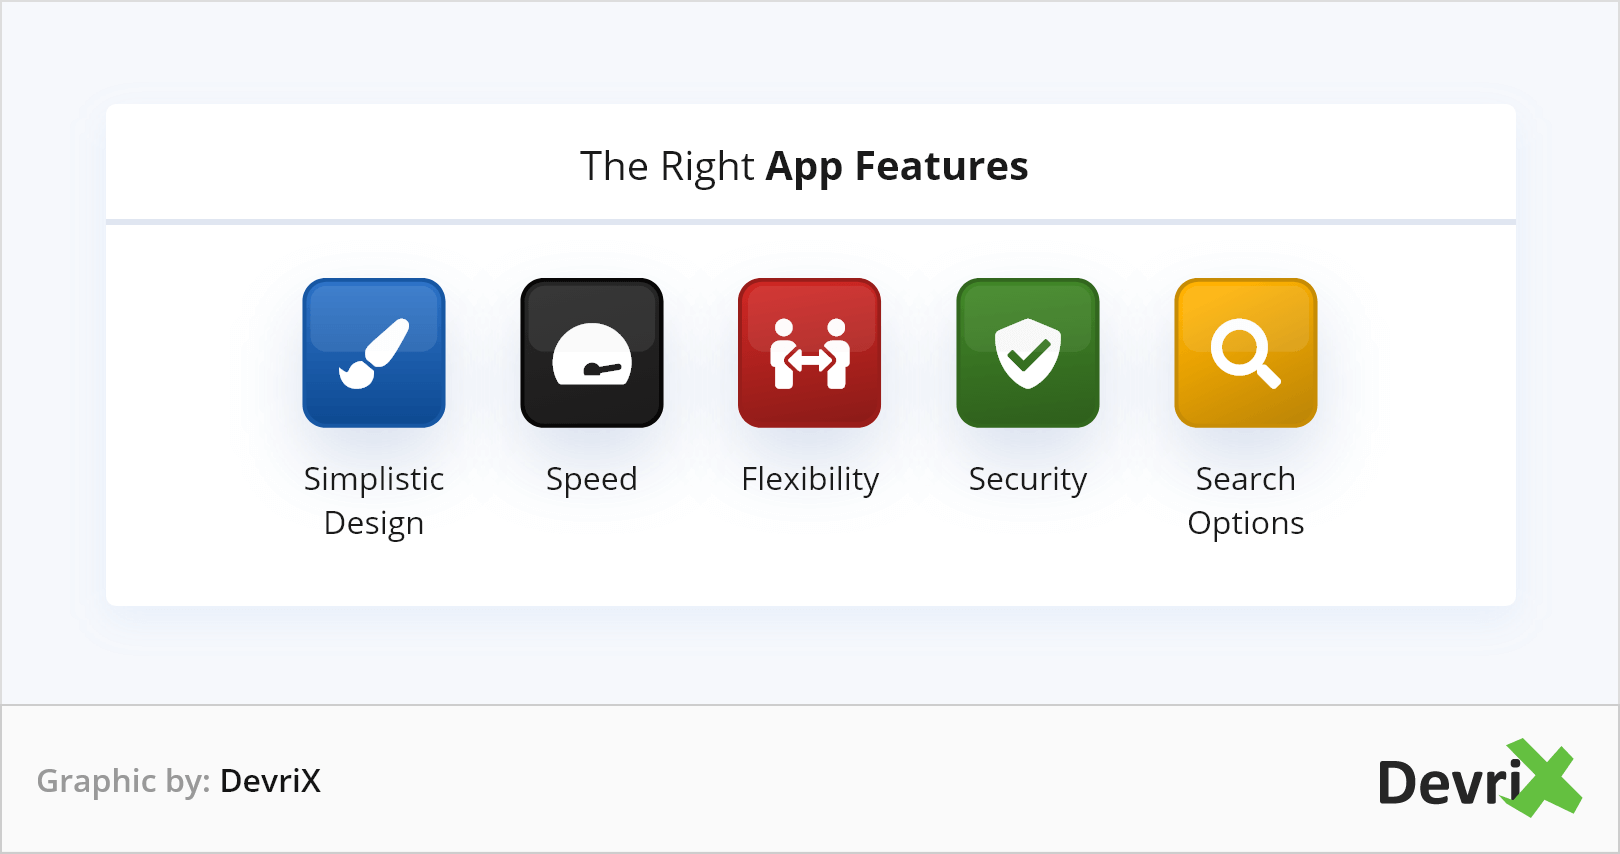 The Right App Features